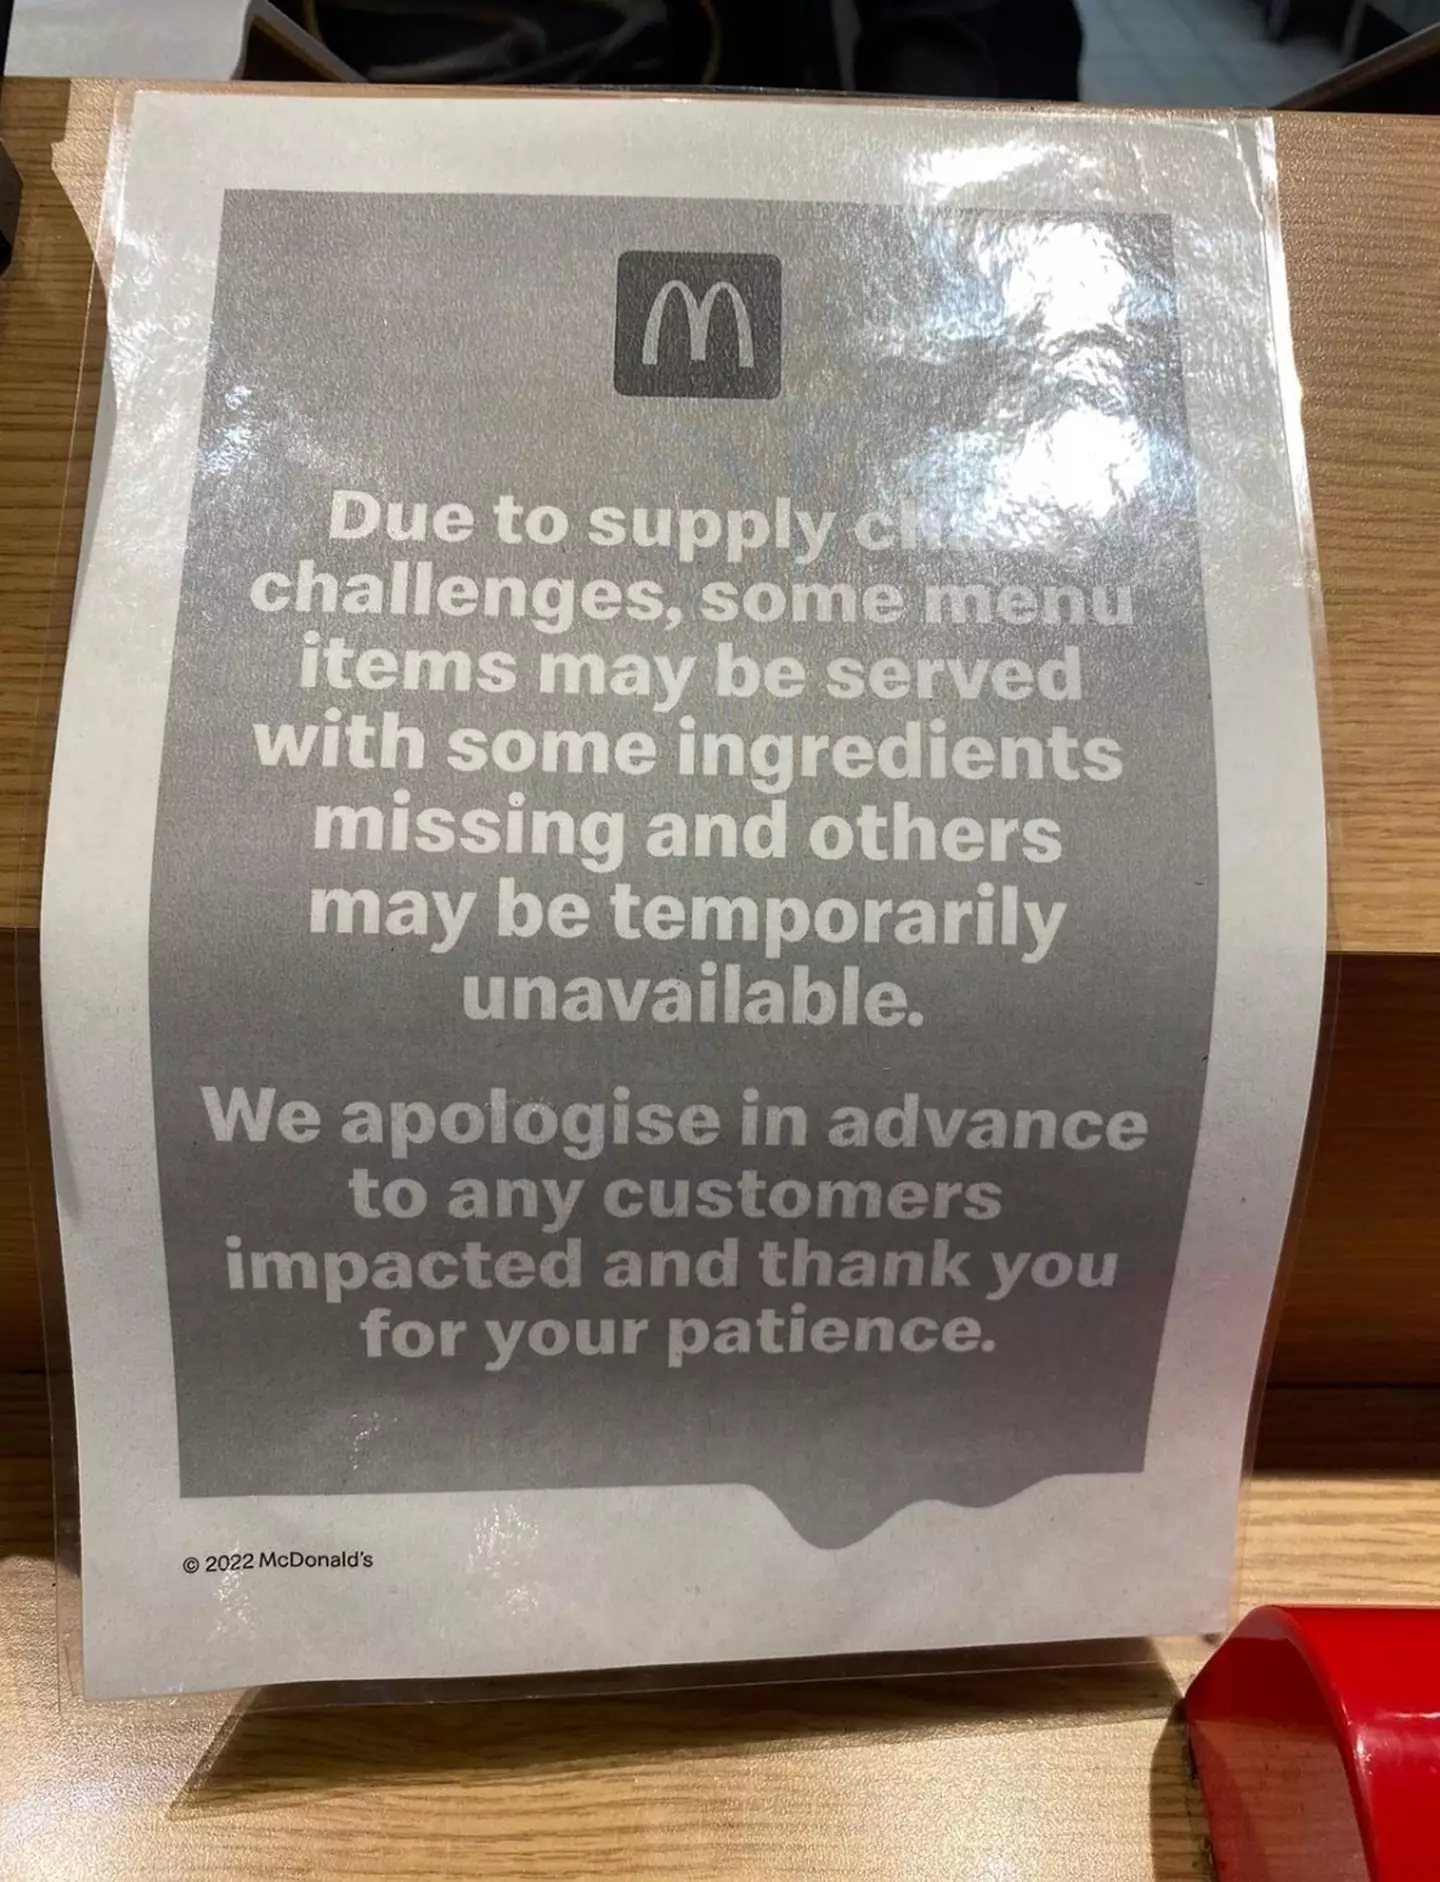 Signs are warning McDonald's diners that items might be unavailable or altered.